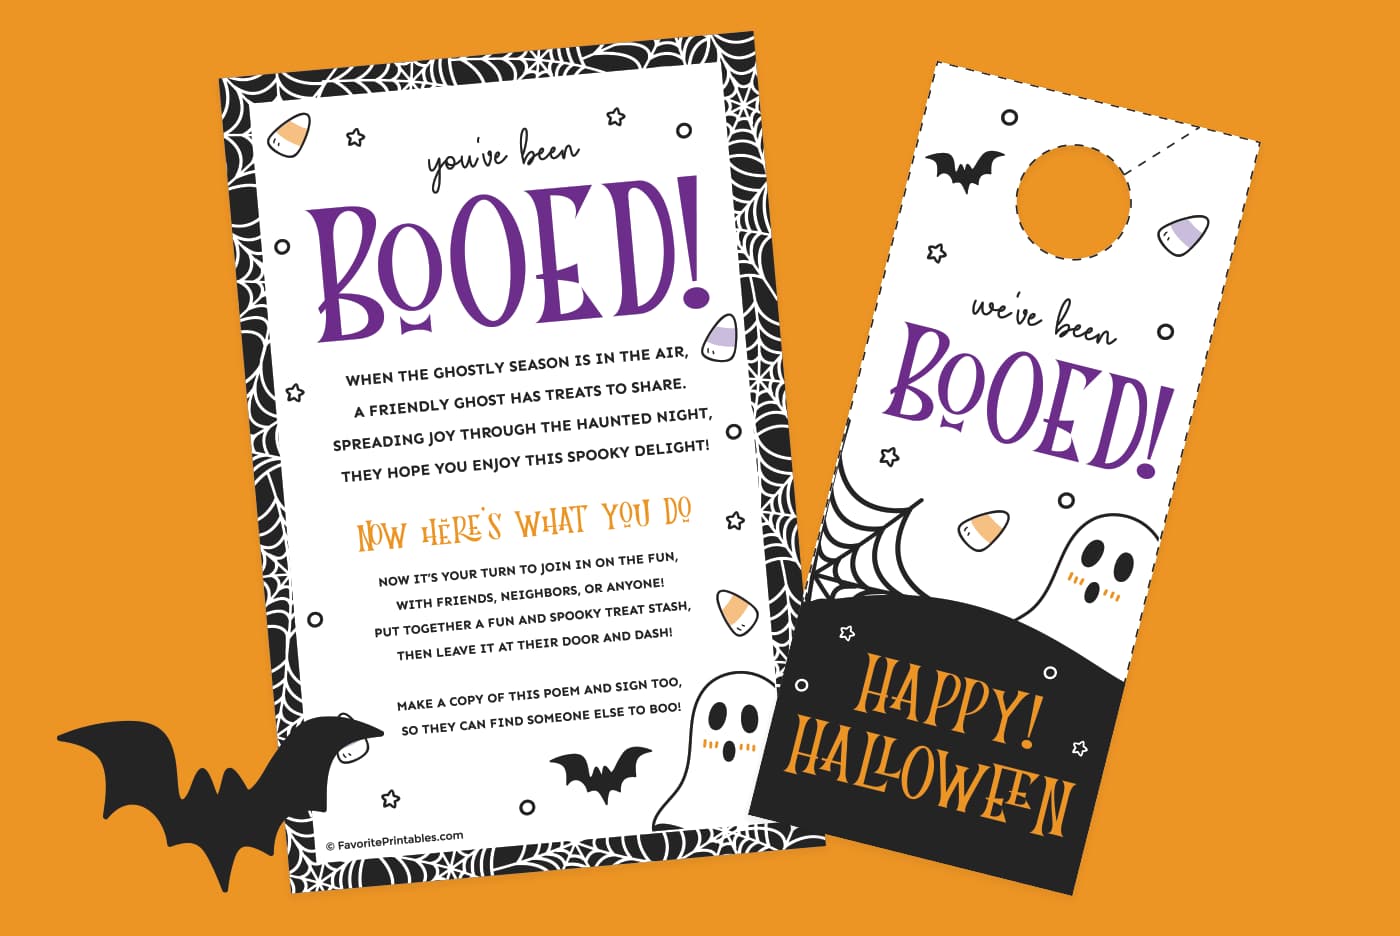 Free printable "You've Been Booed" preview set.